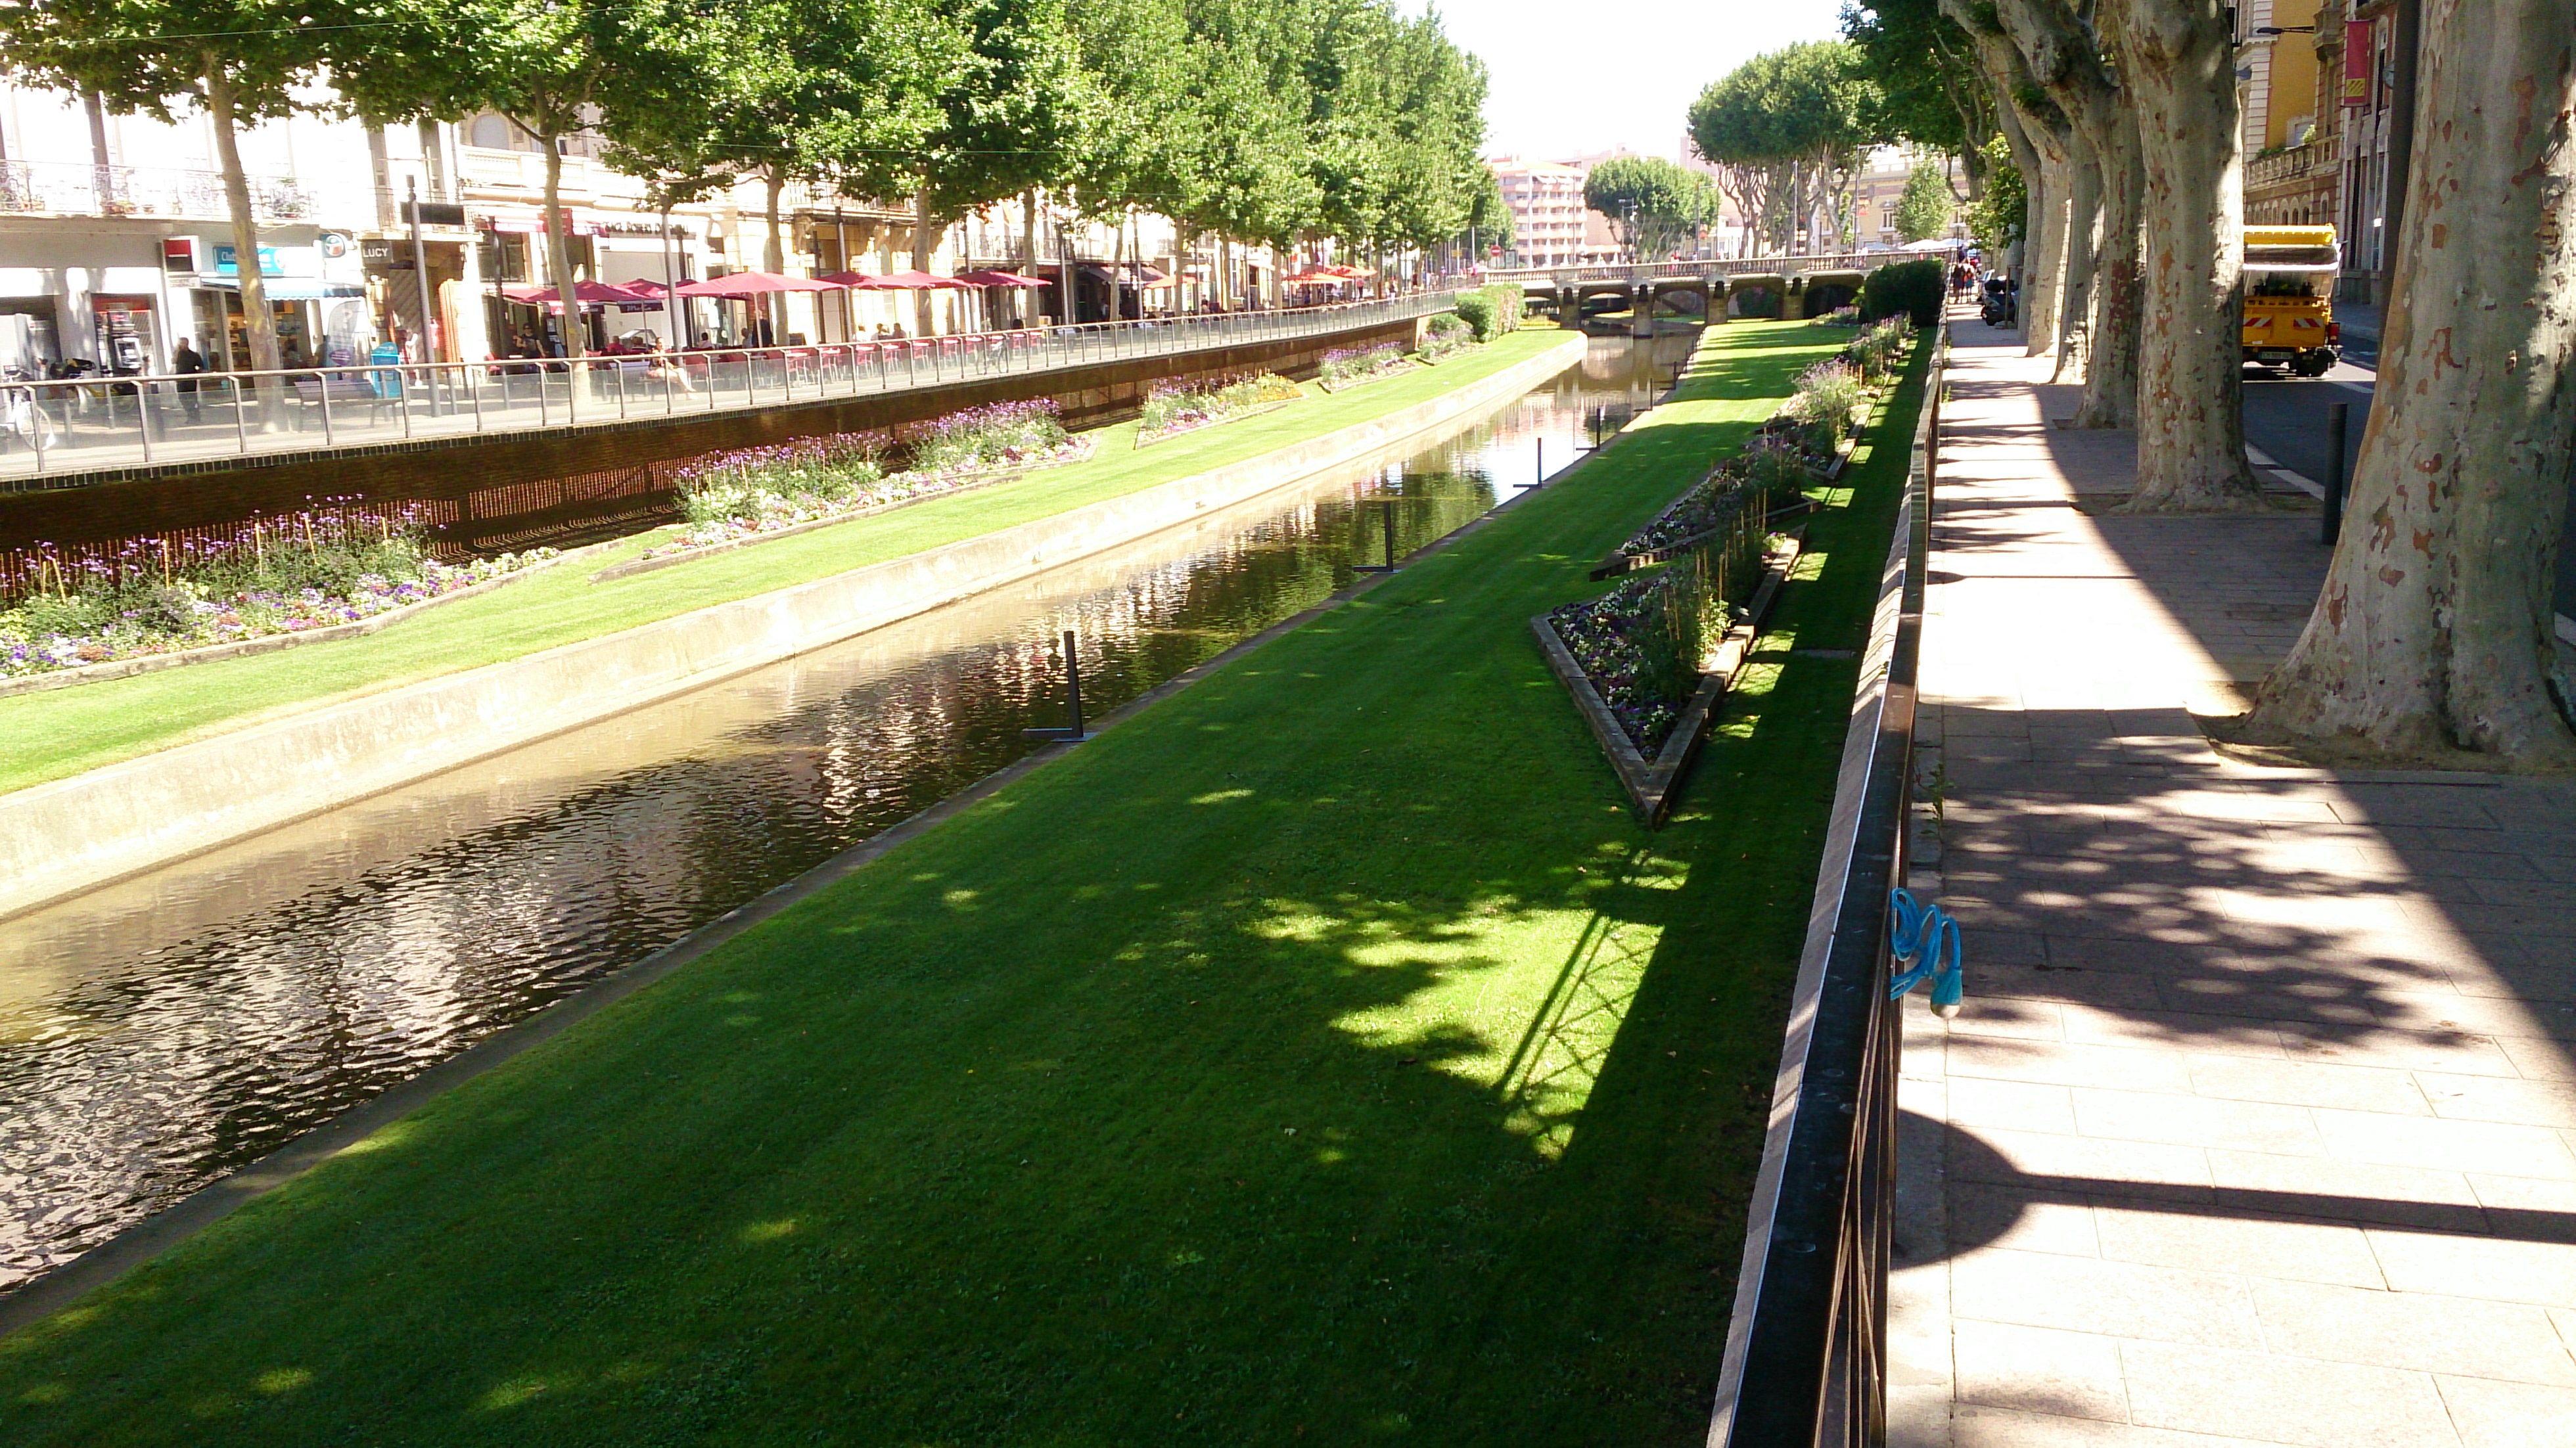 Canal and grass verges on the canal at Perpignan